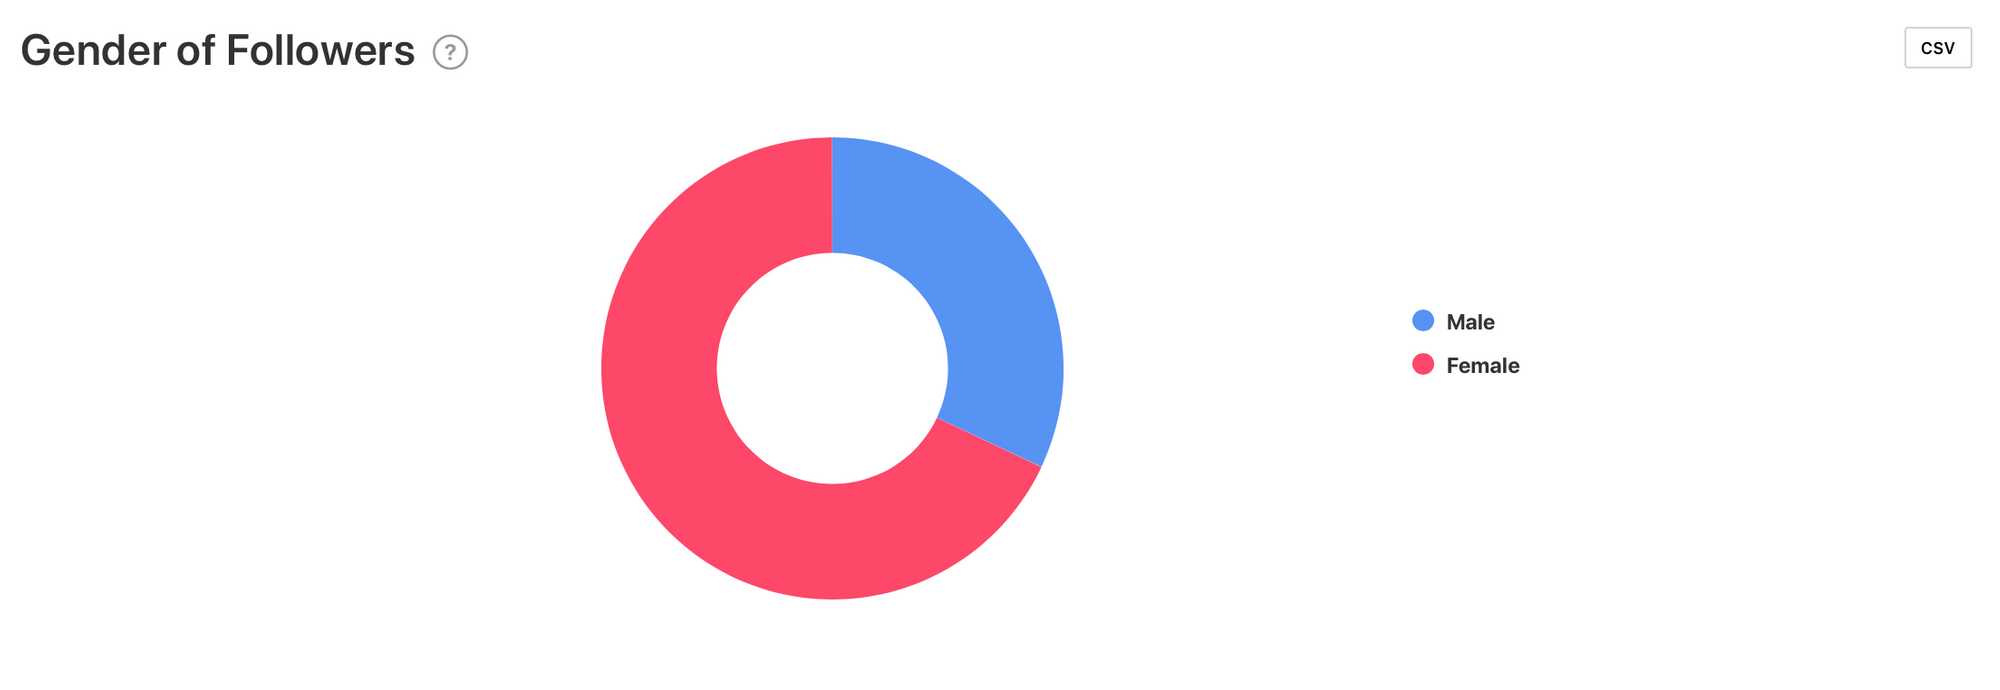 Gender of Followers graph by Minter.io